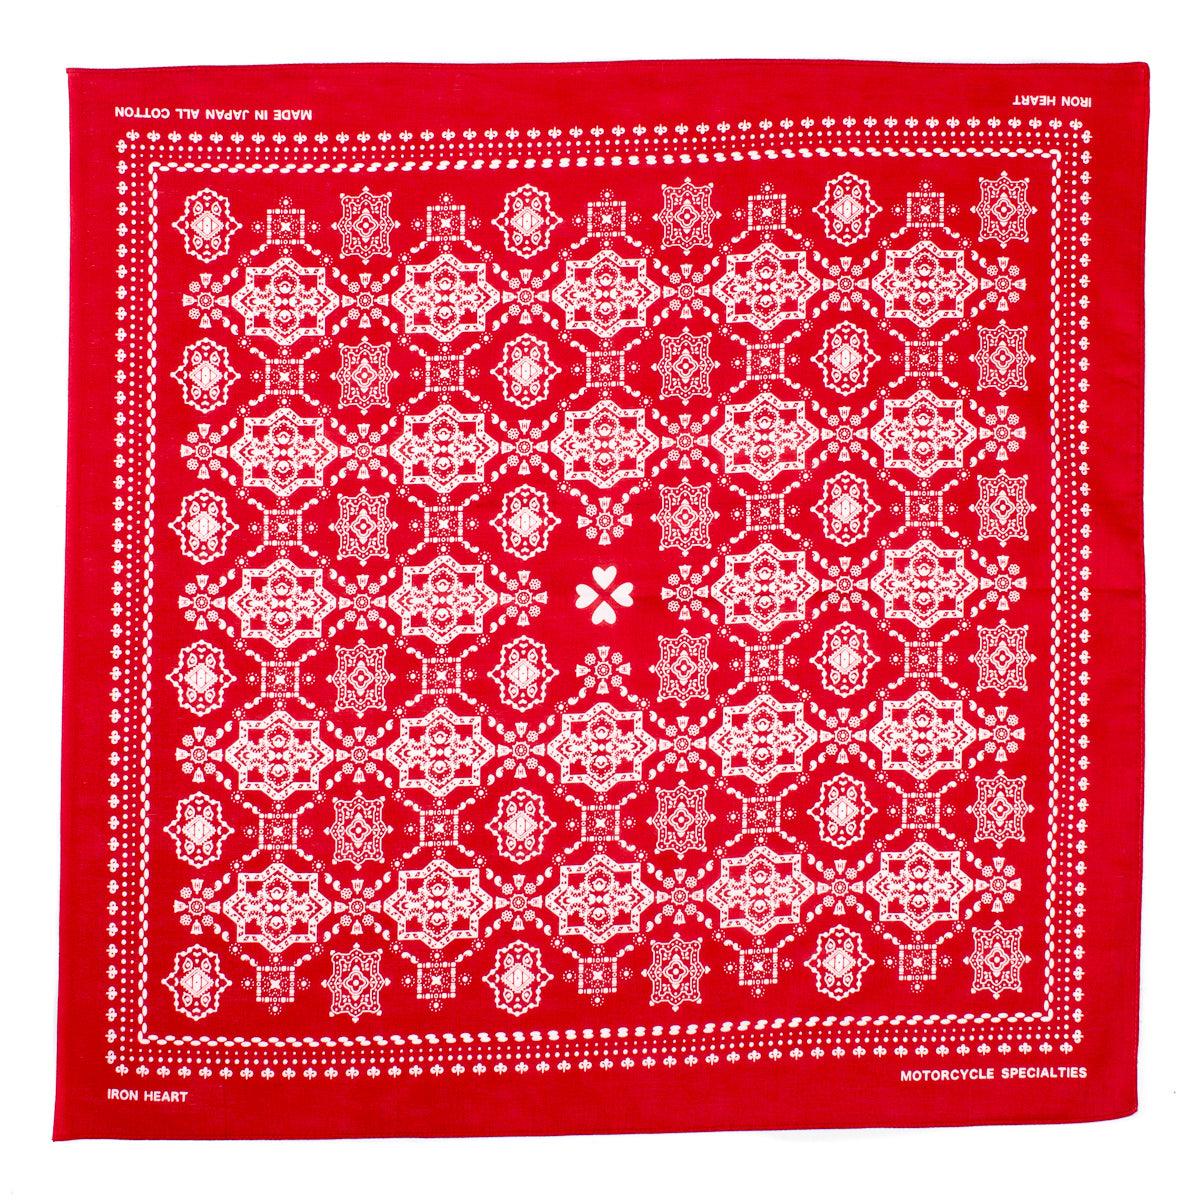 Image showing the IHG-051 - Iron Heart “Bell” Print Bandana - Black, Red, Green, Purple, Blue which is a Others described by the following info Accessories, Iron Heart, Others, Released and sold on the IRON HEART GERMANY online store